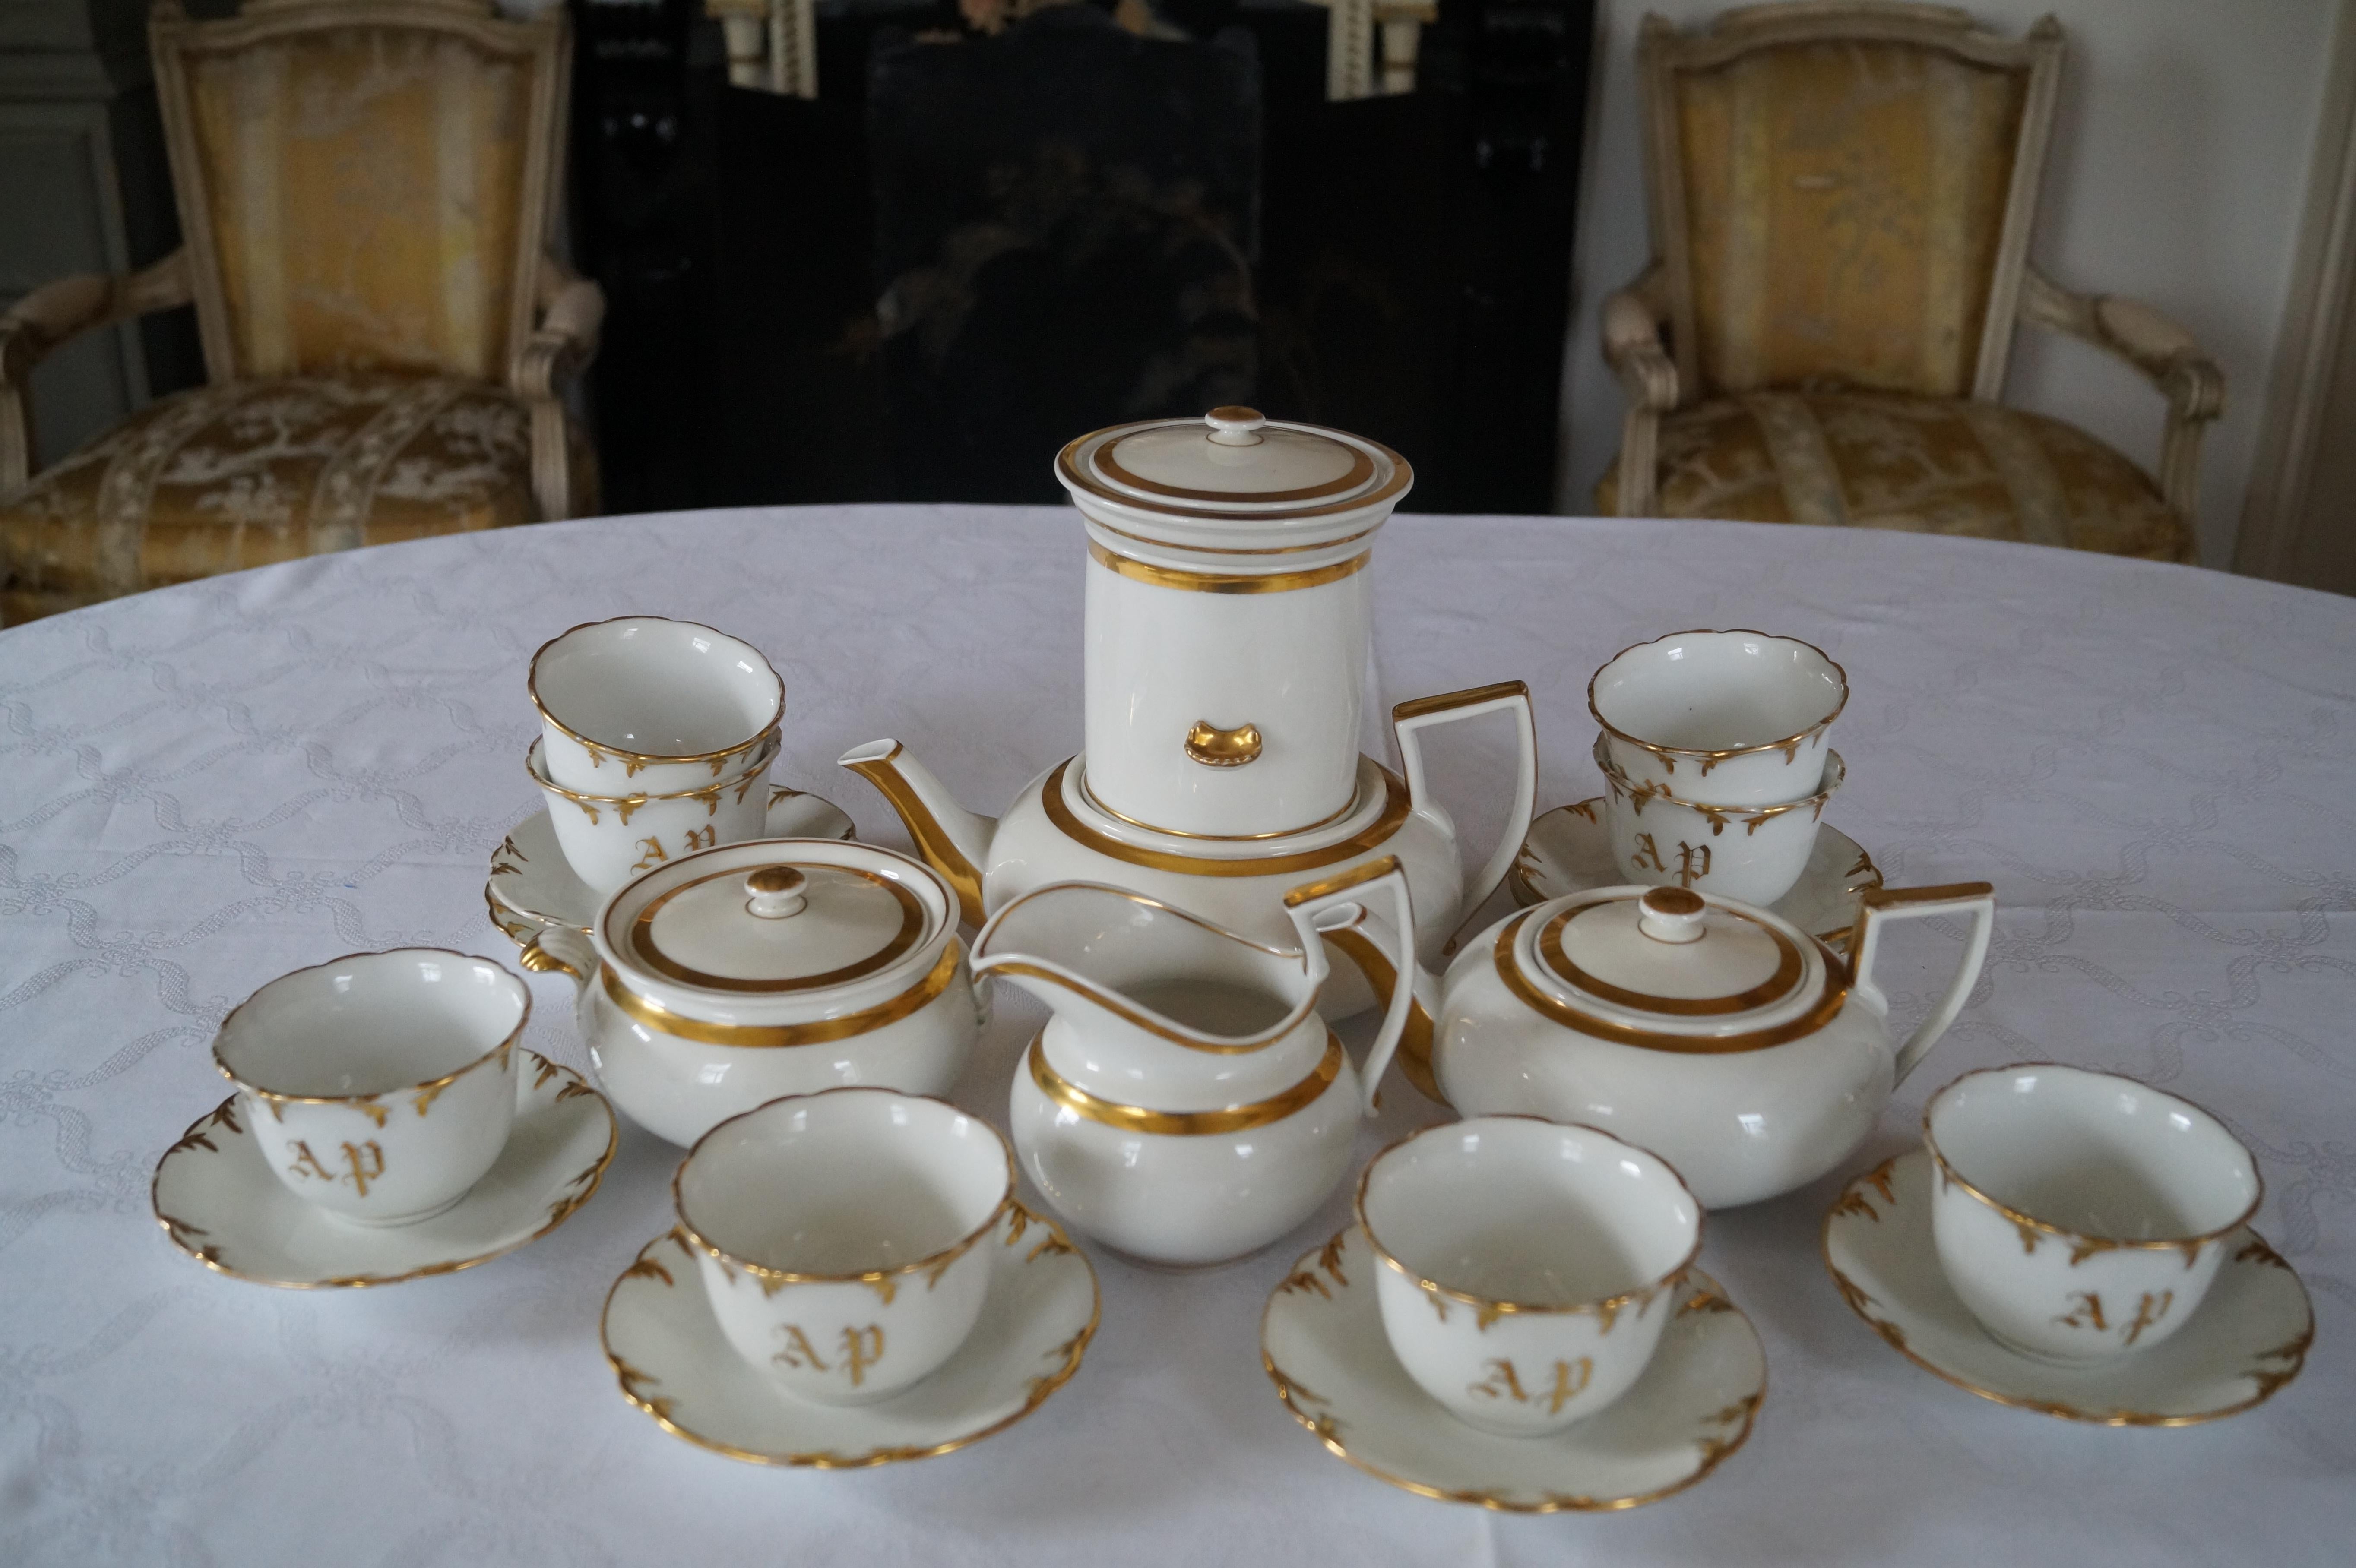 Beautiful, Rare shape model, Old Paris porcelain coffee tea set with coffee filter attachment and cup and saucers with monogram!

The coffee filter only fits the large coffee (tea) pot. Usually tea is not made with a coffee filter, so I assume it is